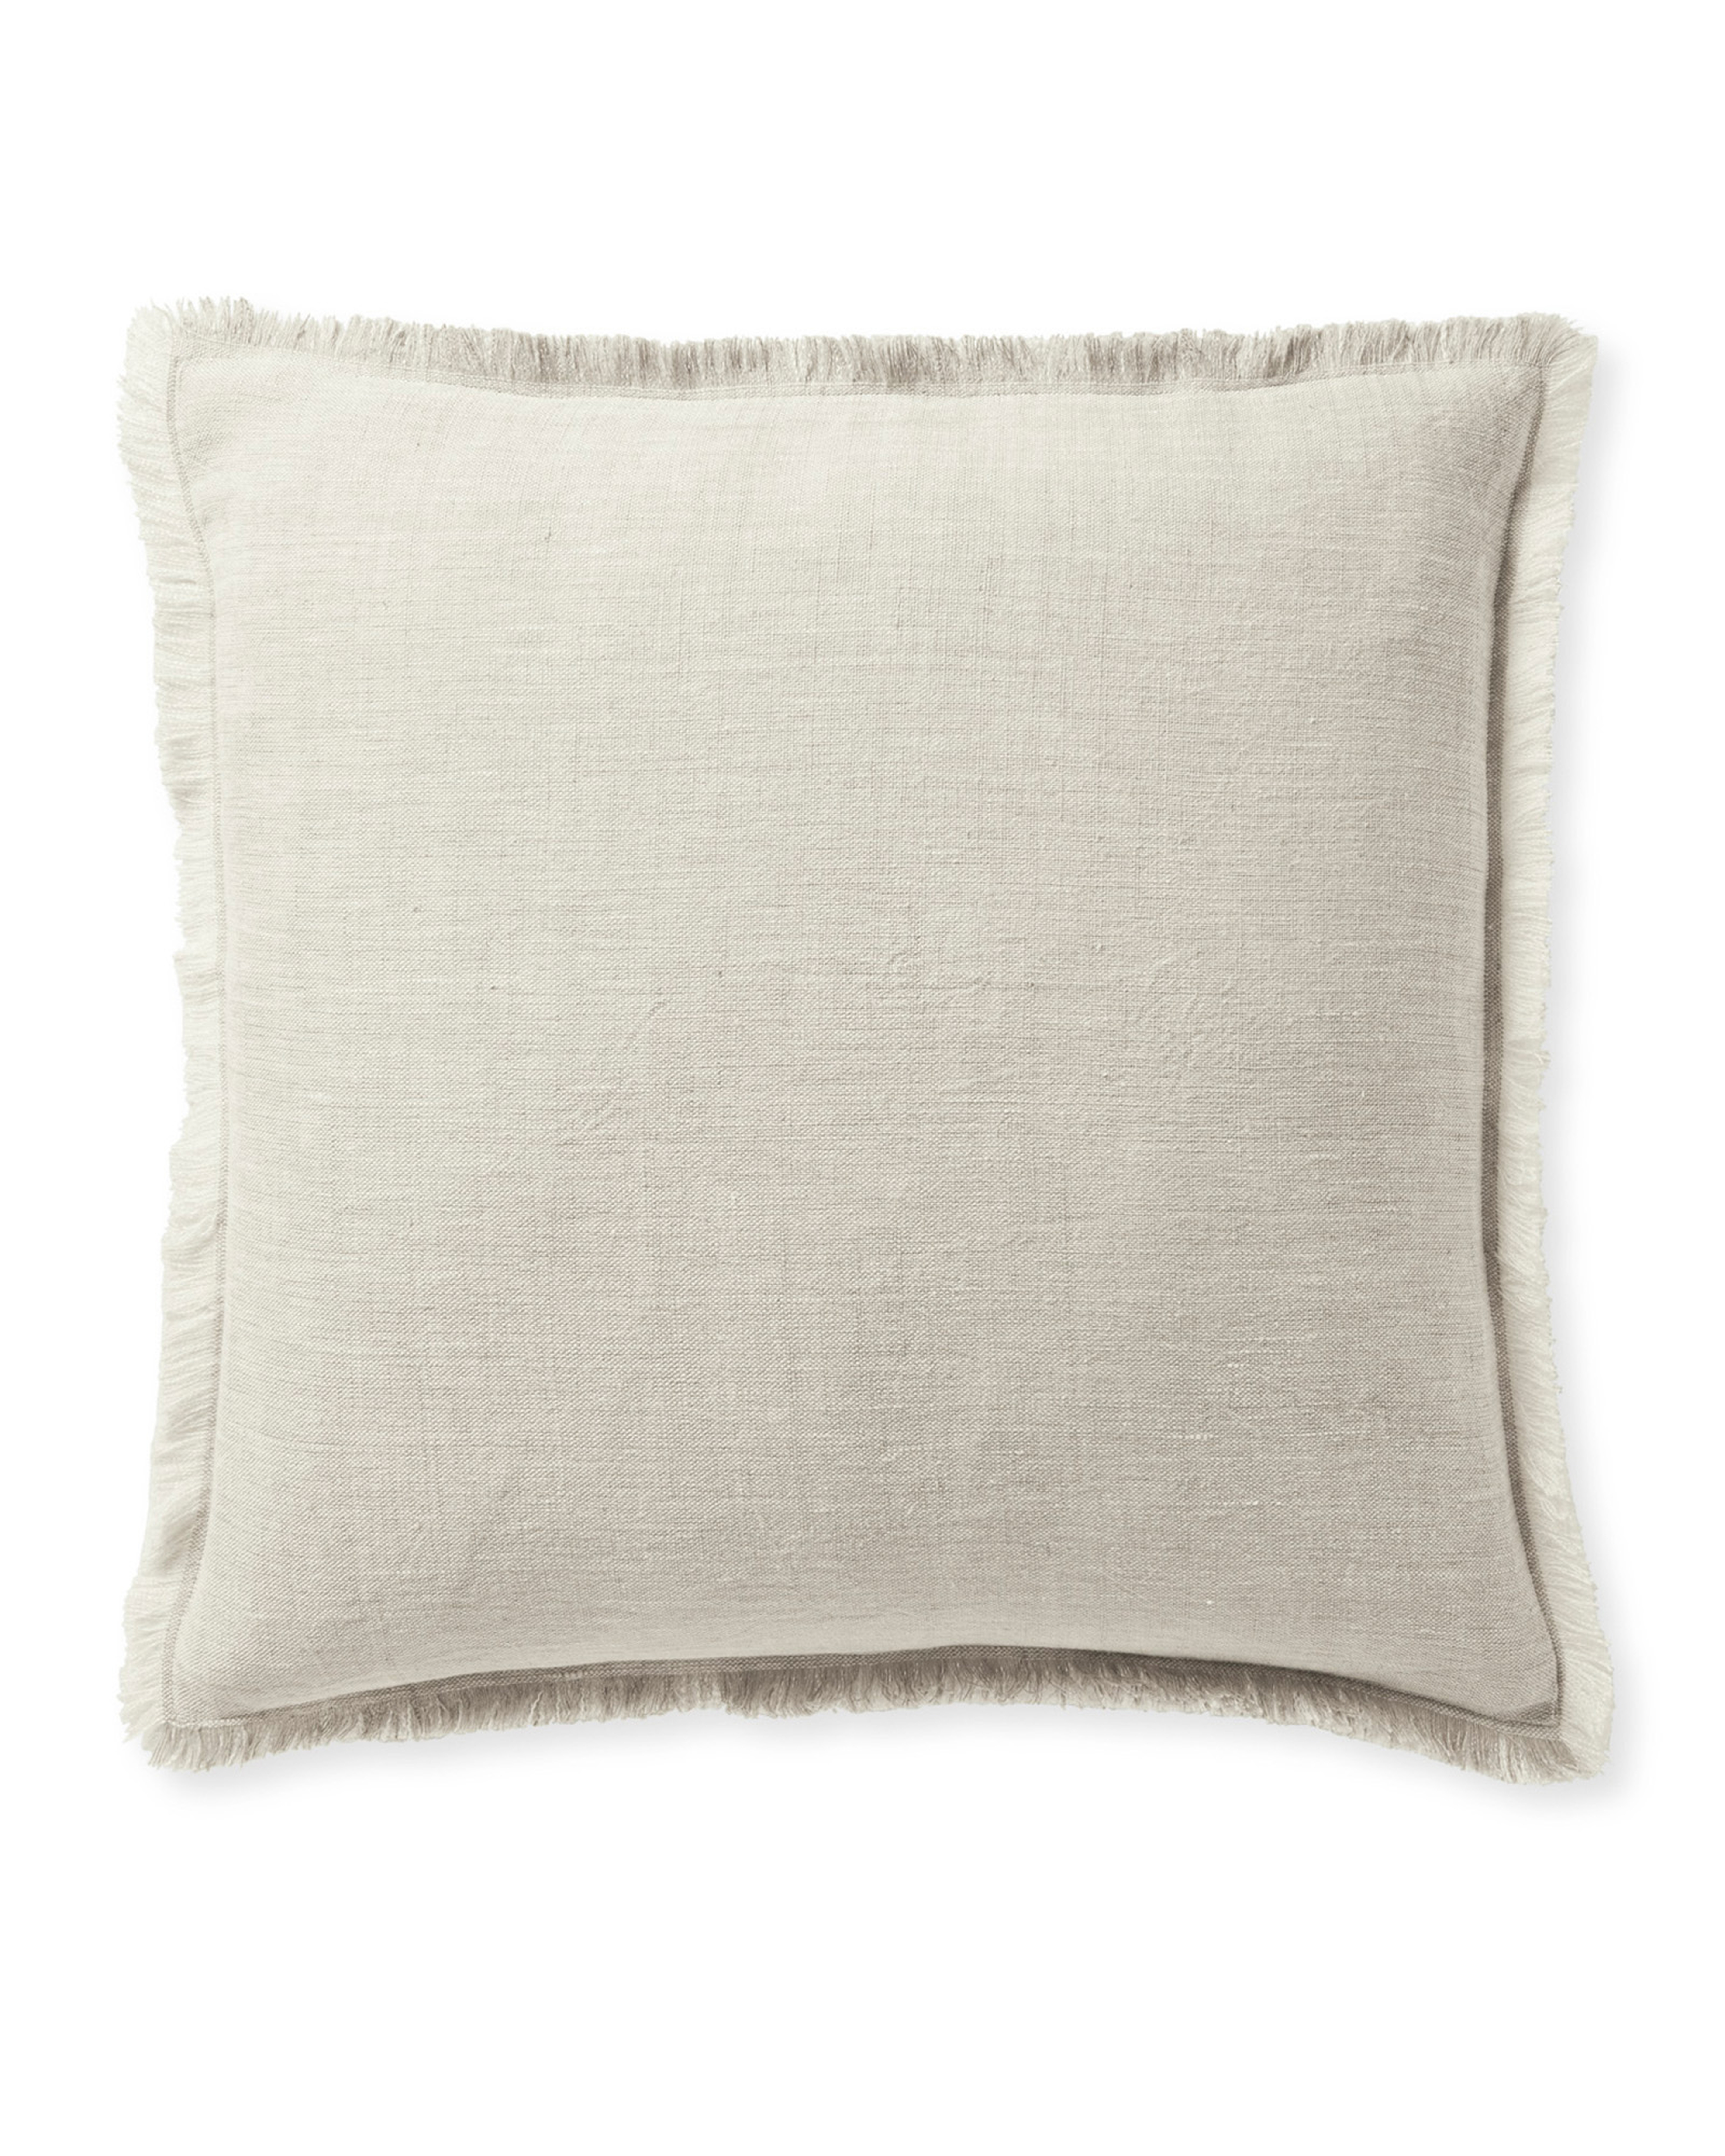 Avalis Pillow Cover, Sand, 24" x 24" - Serena and Lily